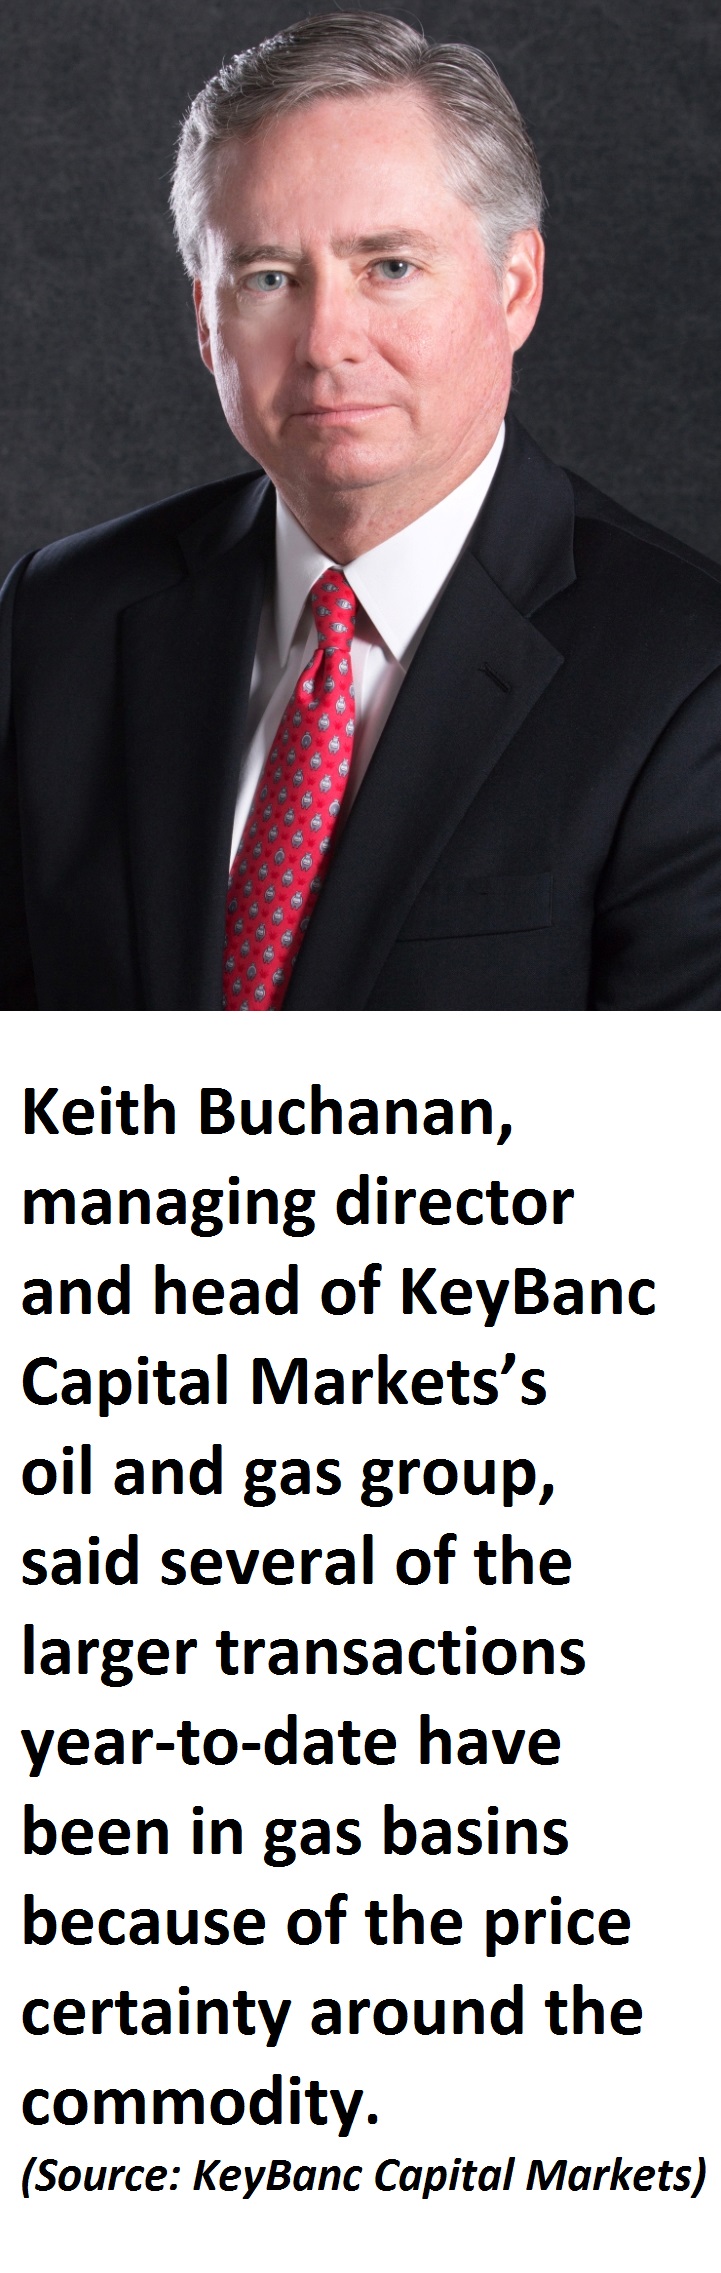 Keith Buchanan, managing director and head of KeyBanc Capital Markets Inc.’s oil and gas group.